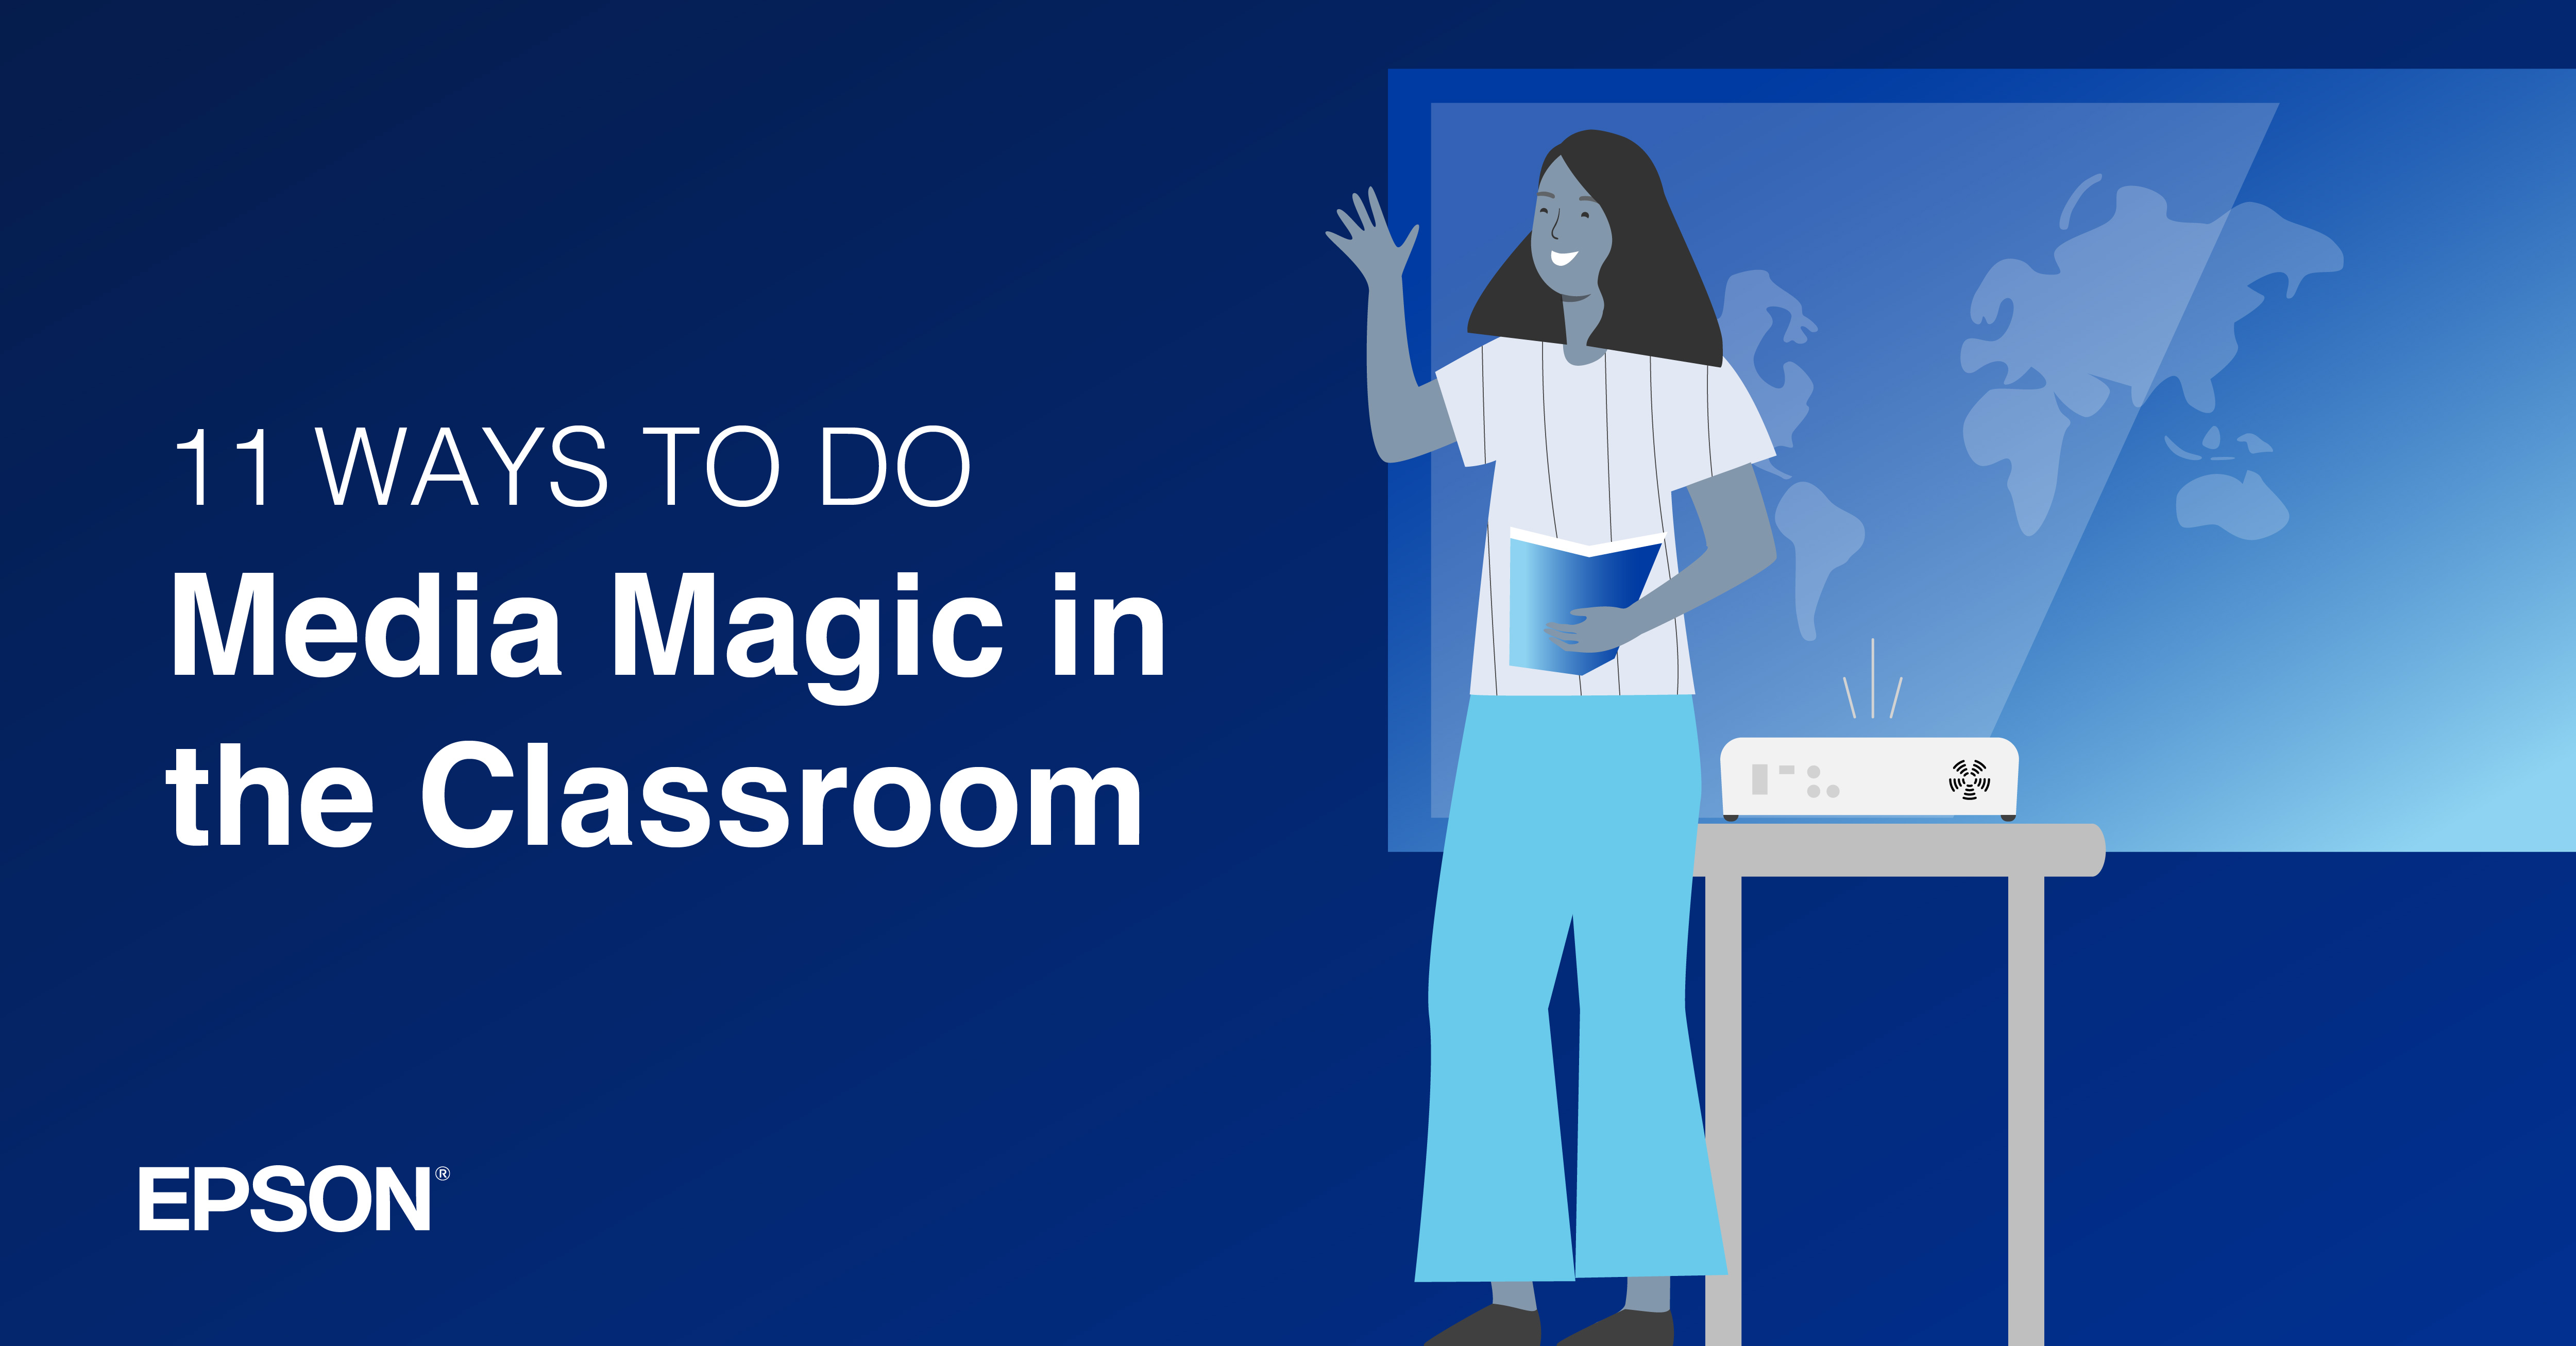 11 Ways to do Media Magic in the Classroom_Social Graphic1.jpg